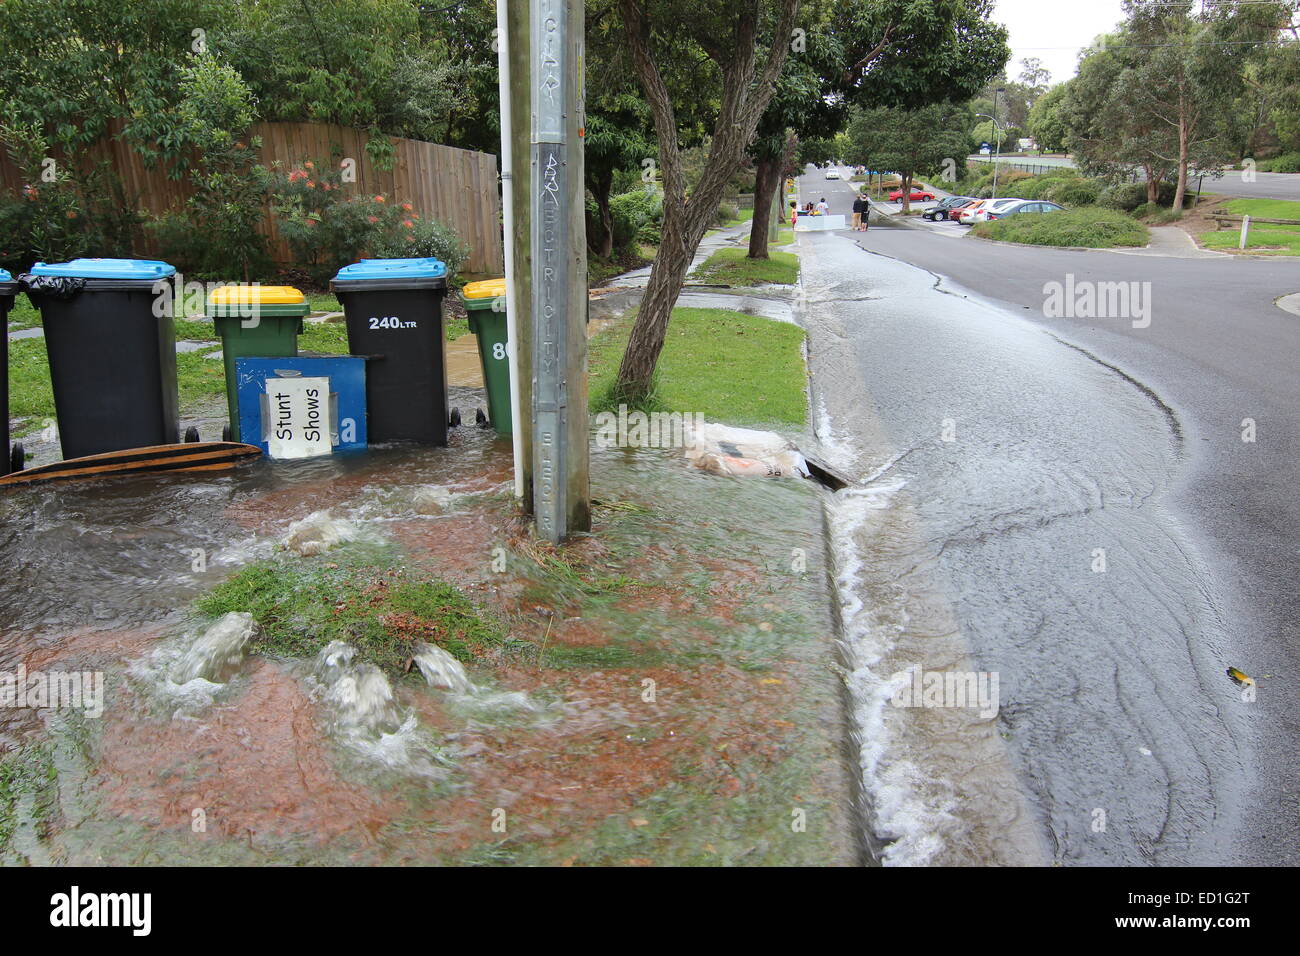 Burst Water Mains Pipe with resulting flooding, Allandale Road, Boronia, Australia Stock Photo